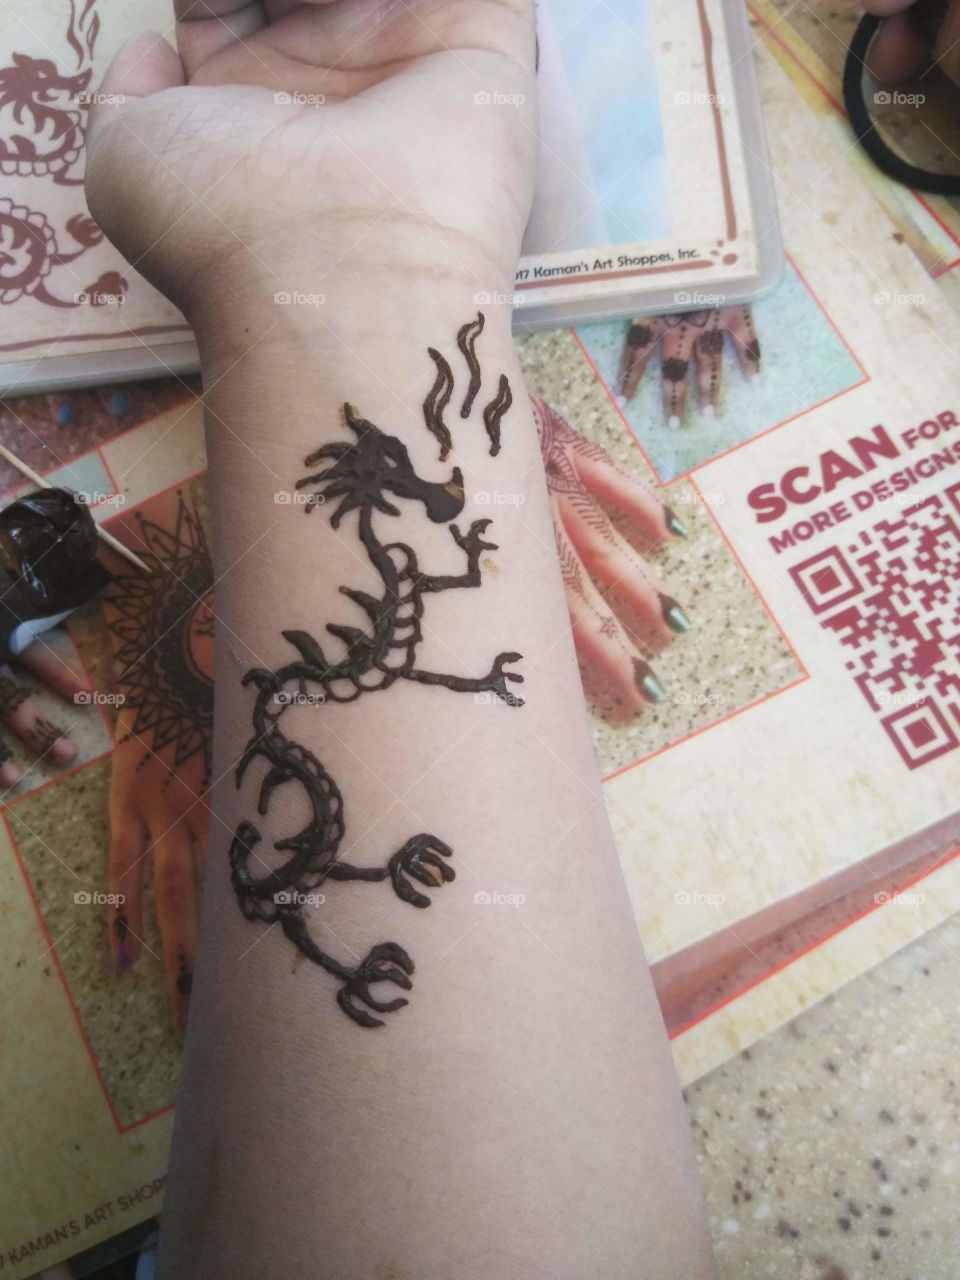 Dragon henna tattoo I drew on client over the summer.